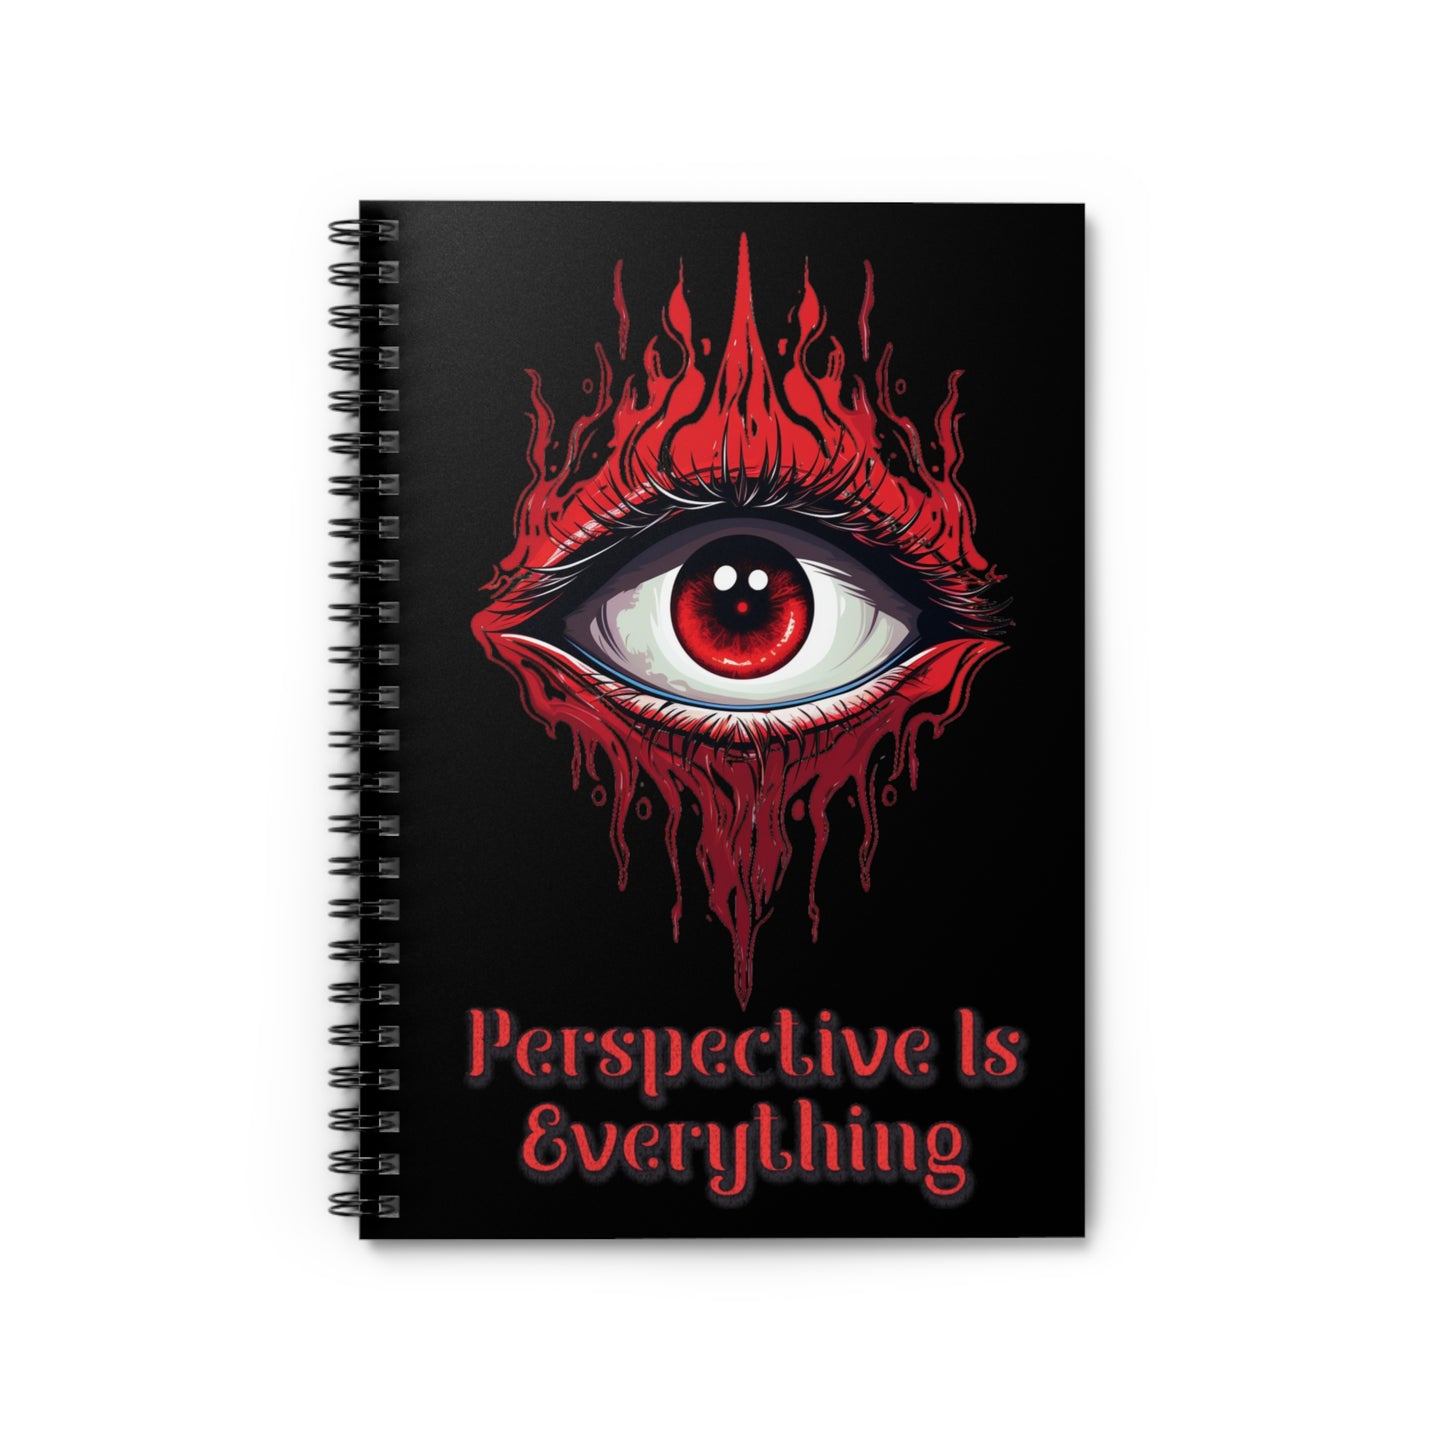 Perspective is Everything: Red | Spiral Notebook - Ruled Line